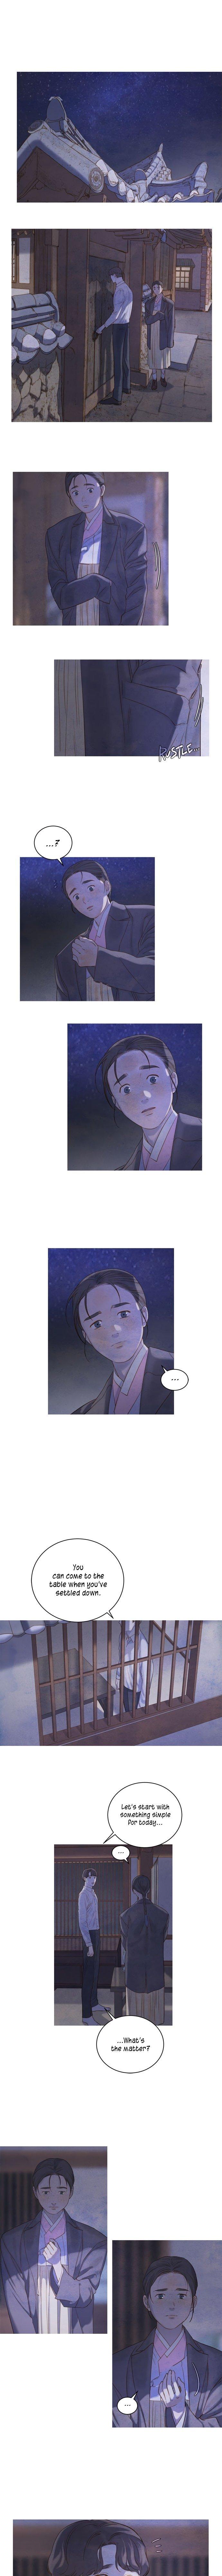 Gorae Byul - The Gyeongseong Mermaid - Chapter 31 Page 8